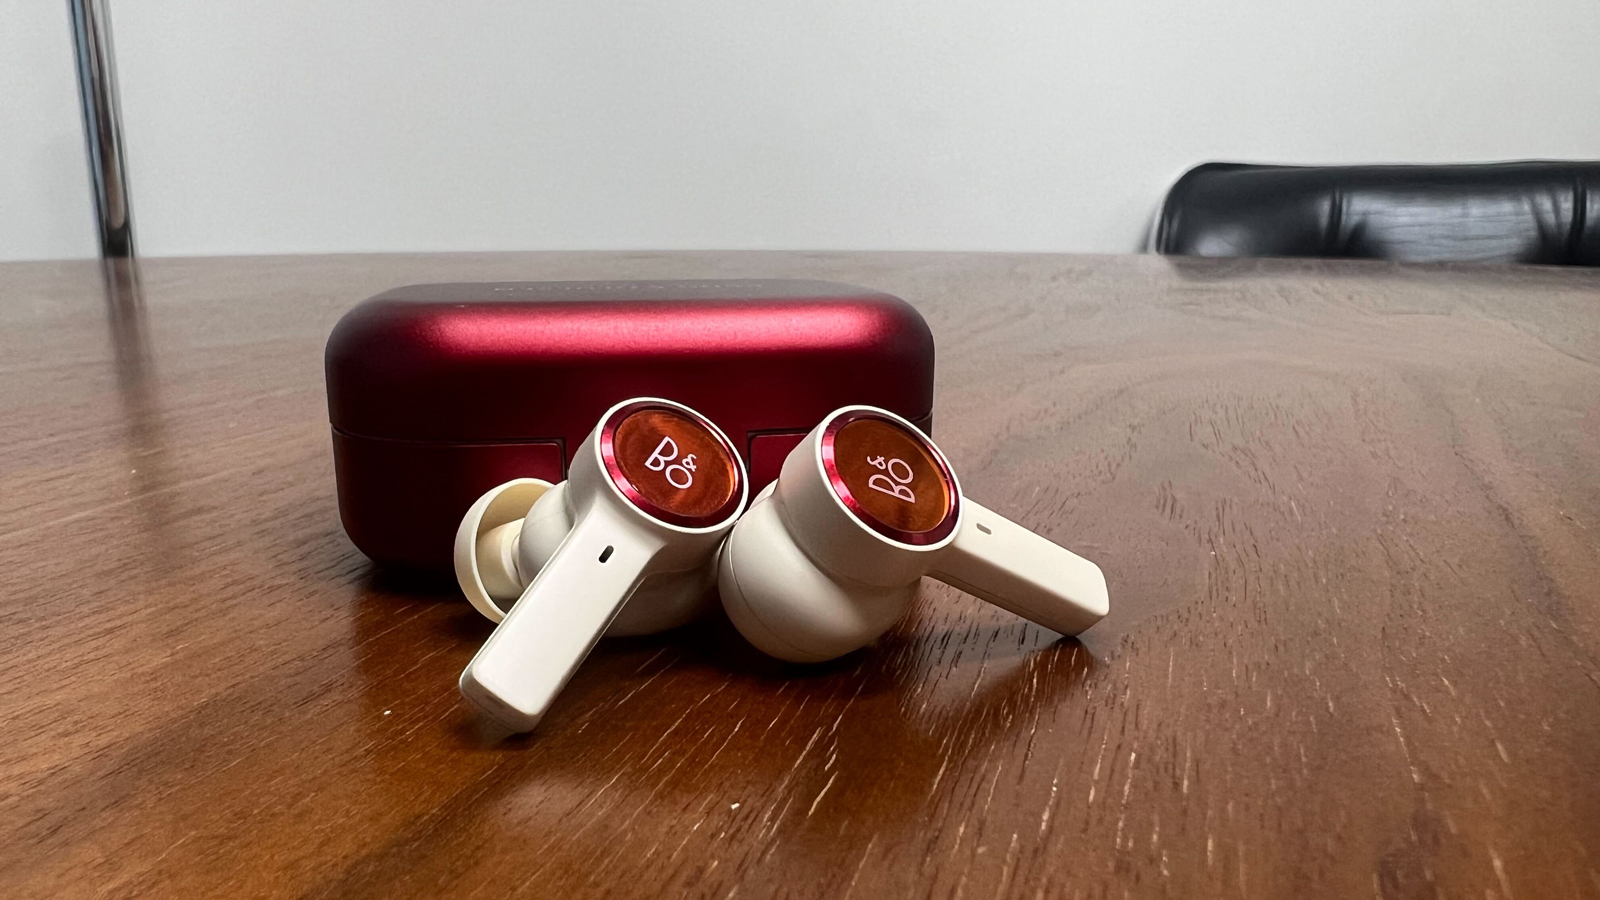 B&O Beoplay EX in Lunar Red resting against their charging case